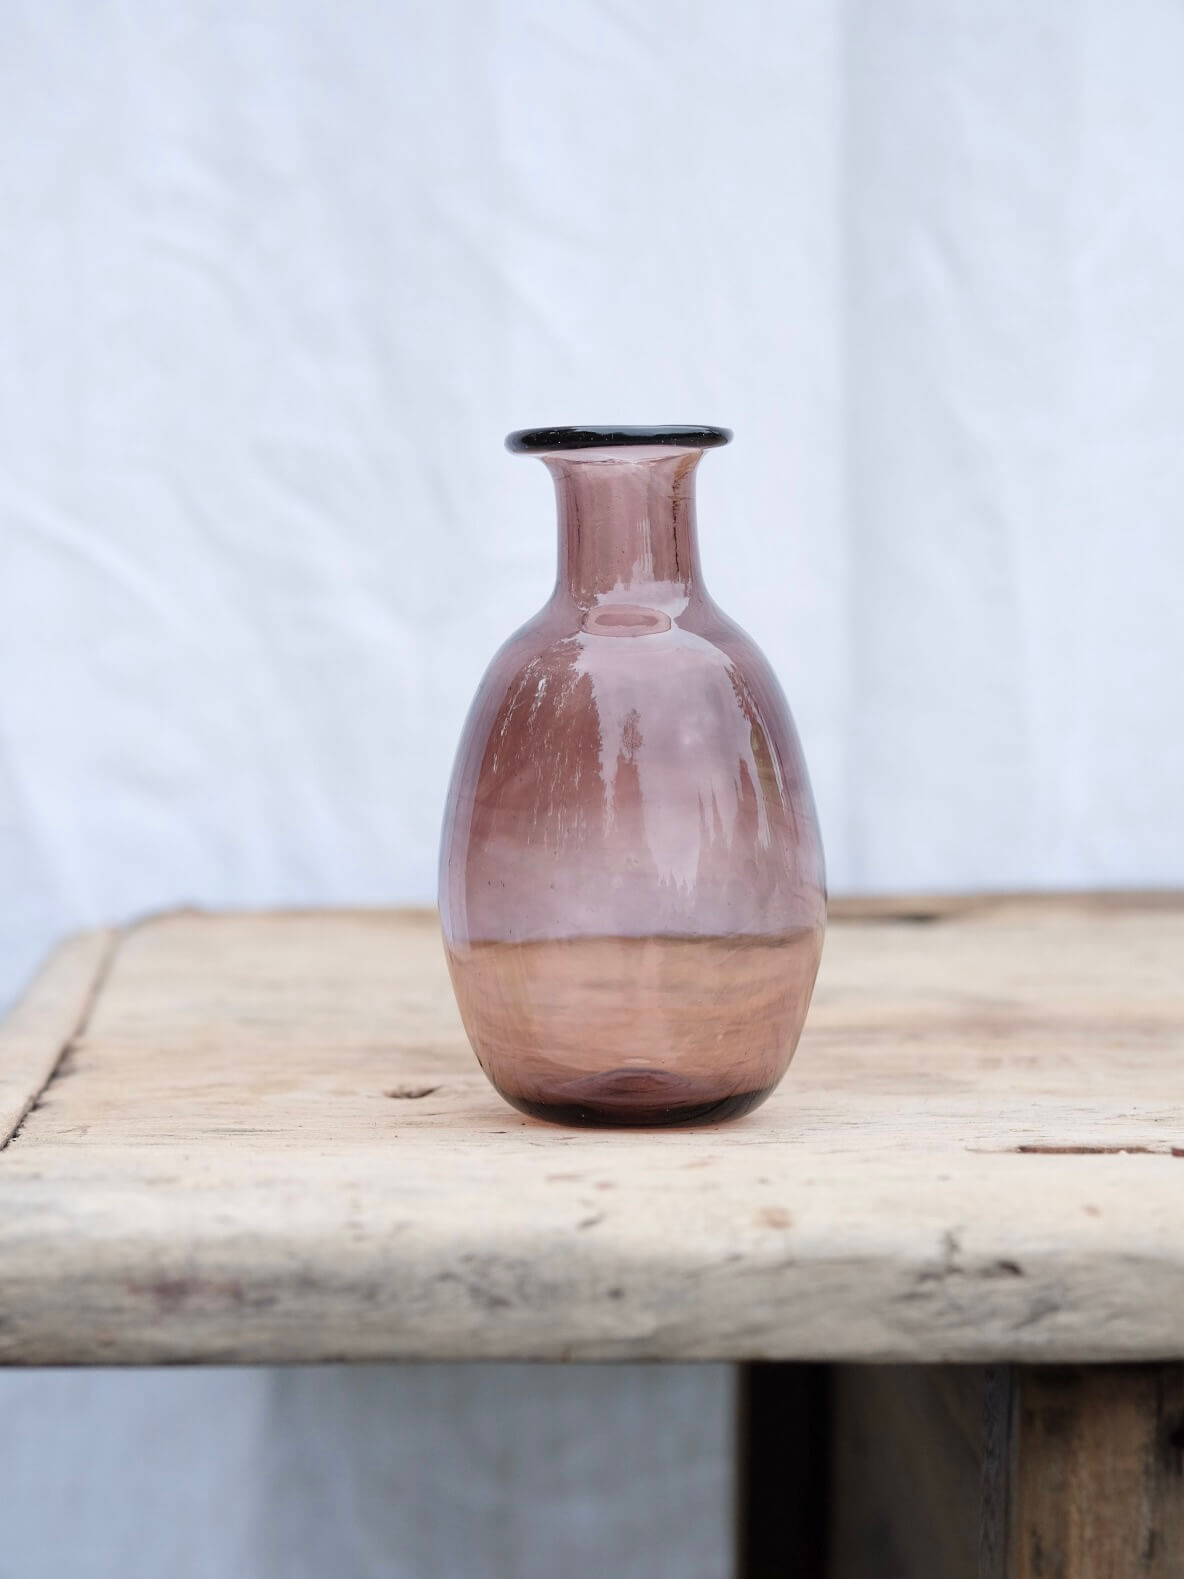 Small raspberry coloured vase sitting on a vintage wooden table. Handblown in Paris by La Soufflerie.